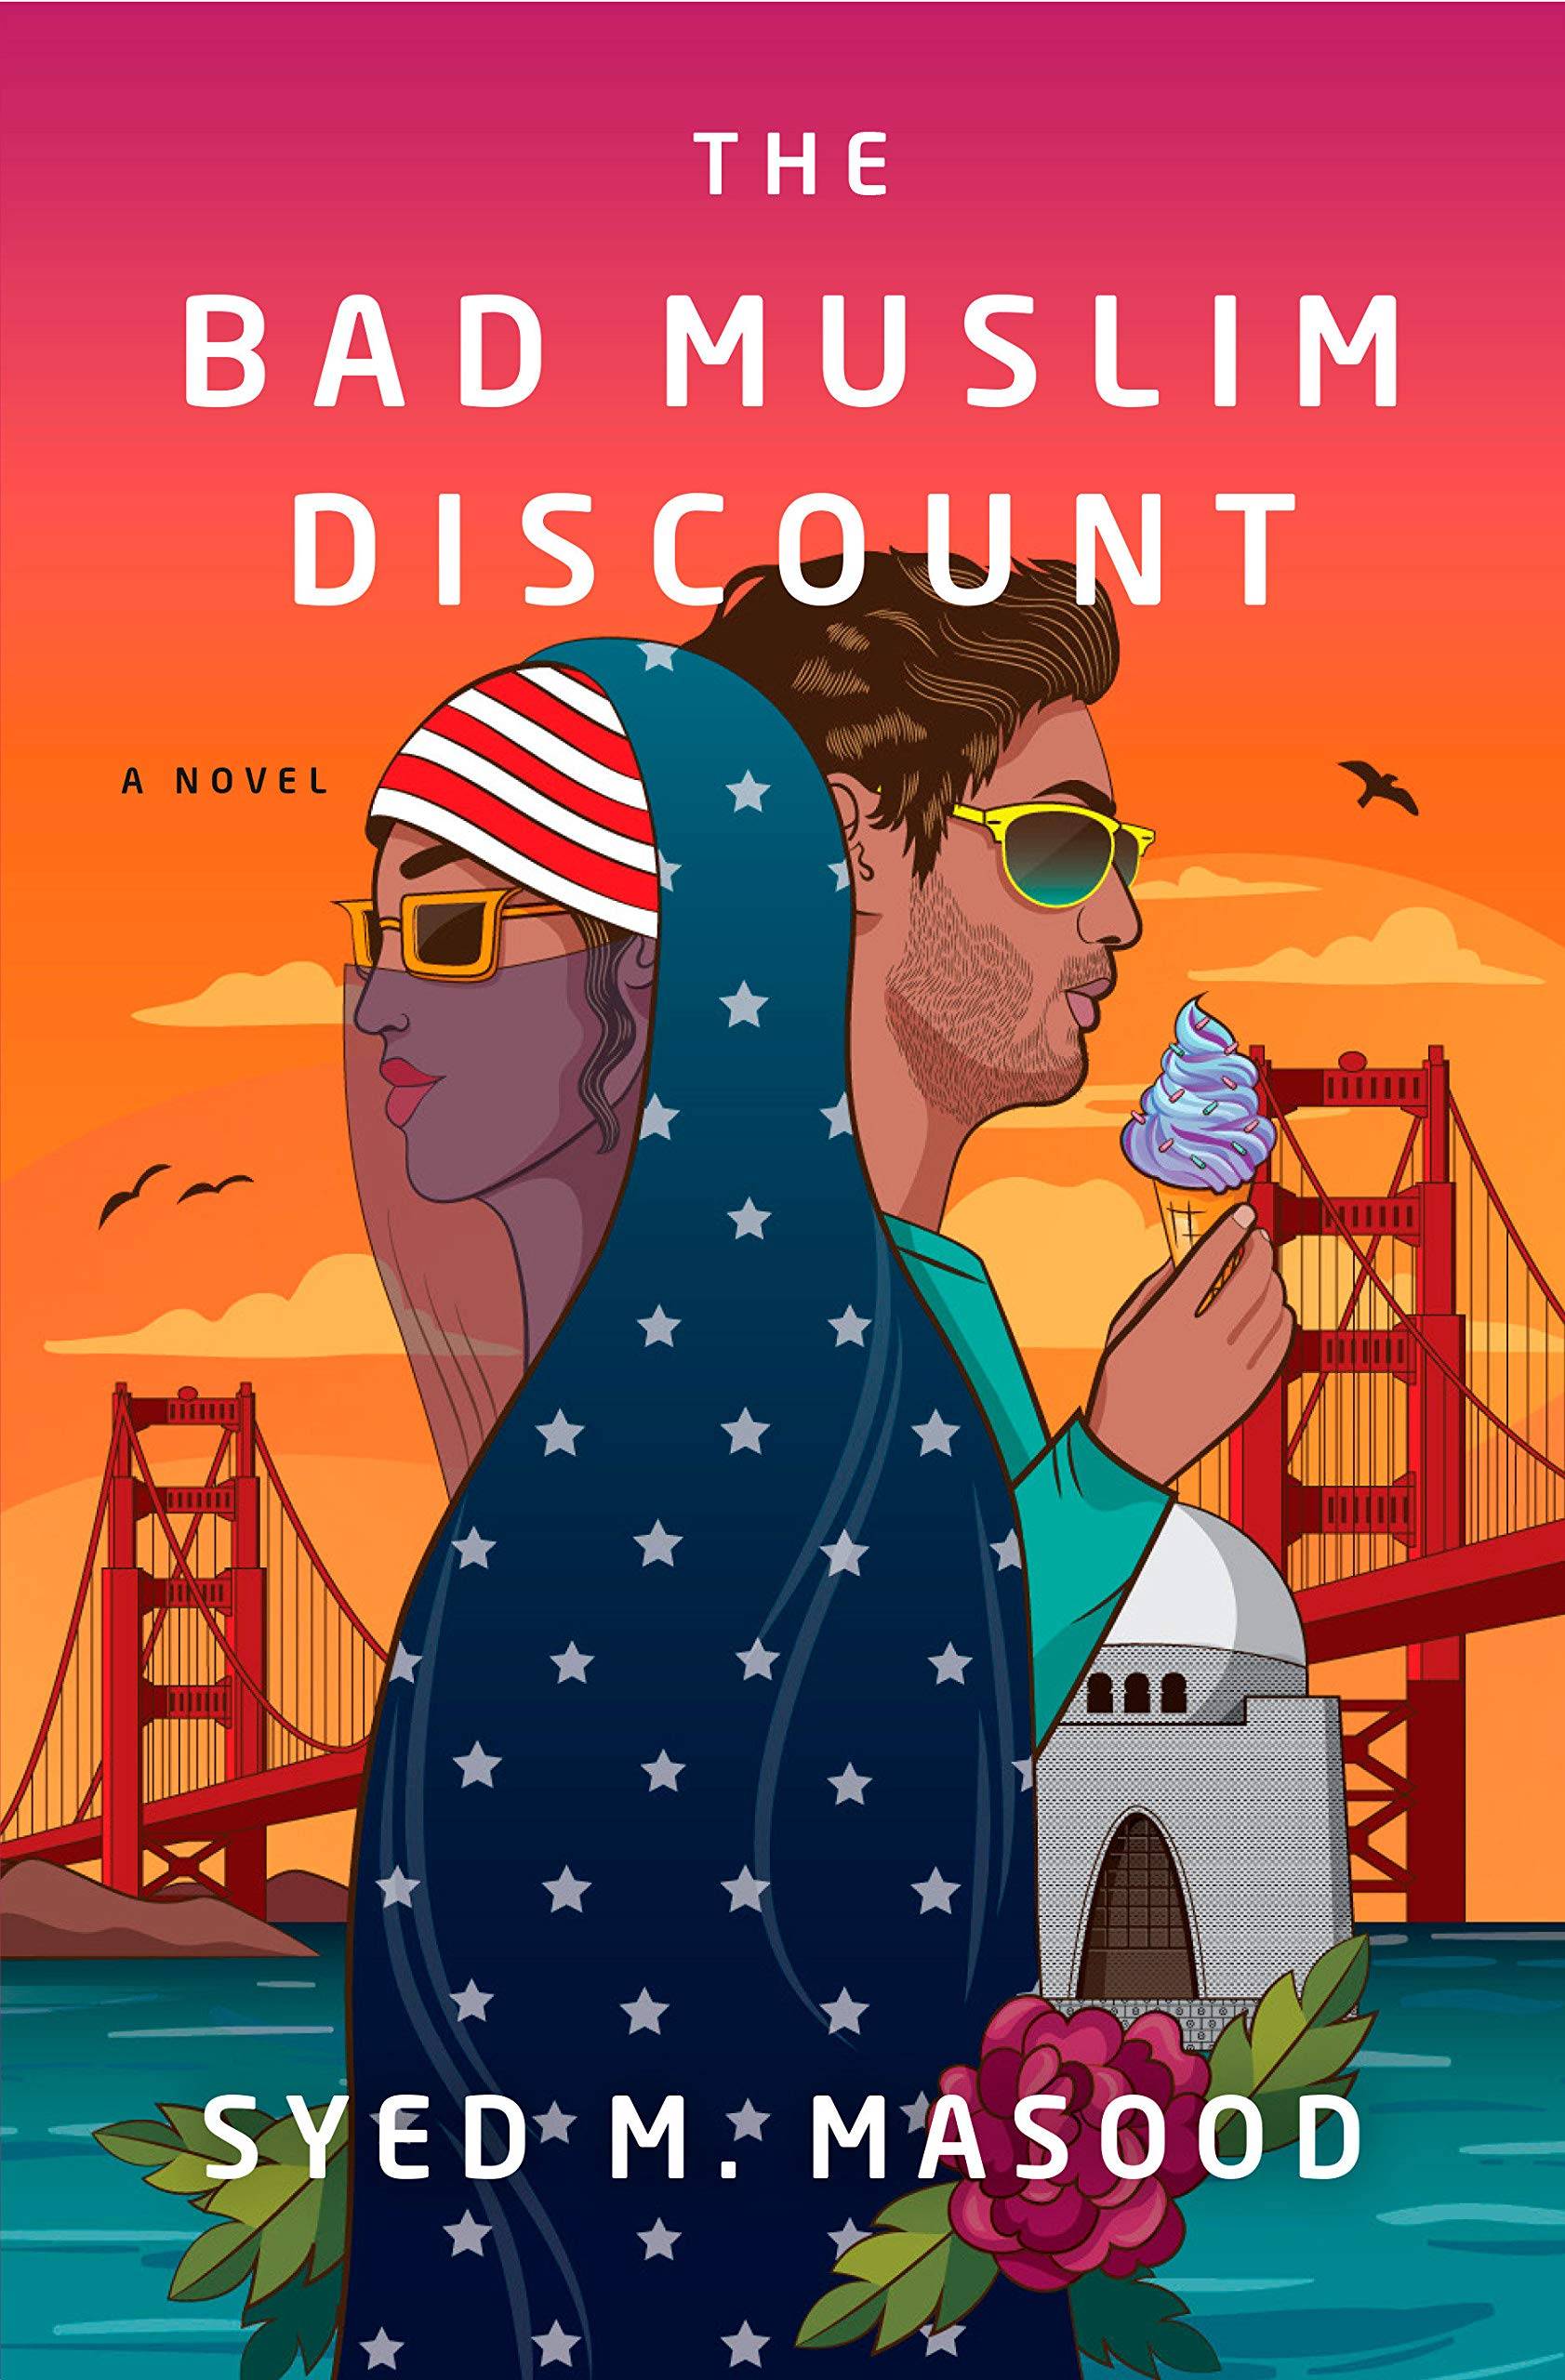 Book cover with two figures looking away from each other, one wearing an American flag hijab and the other wearing sunglasses and holding an ice cream cone